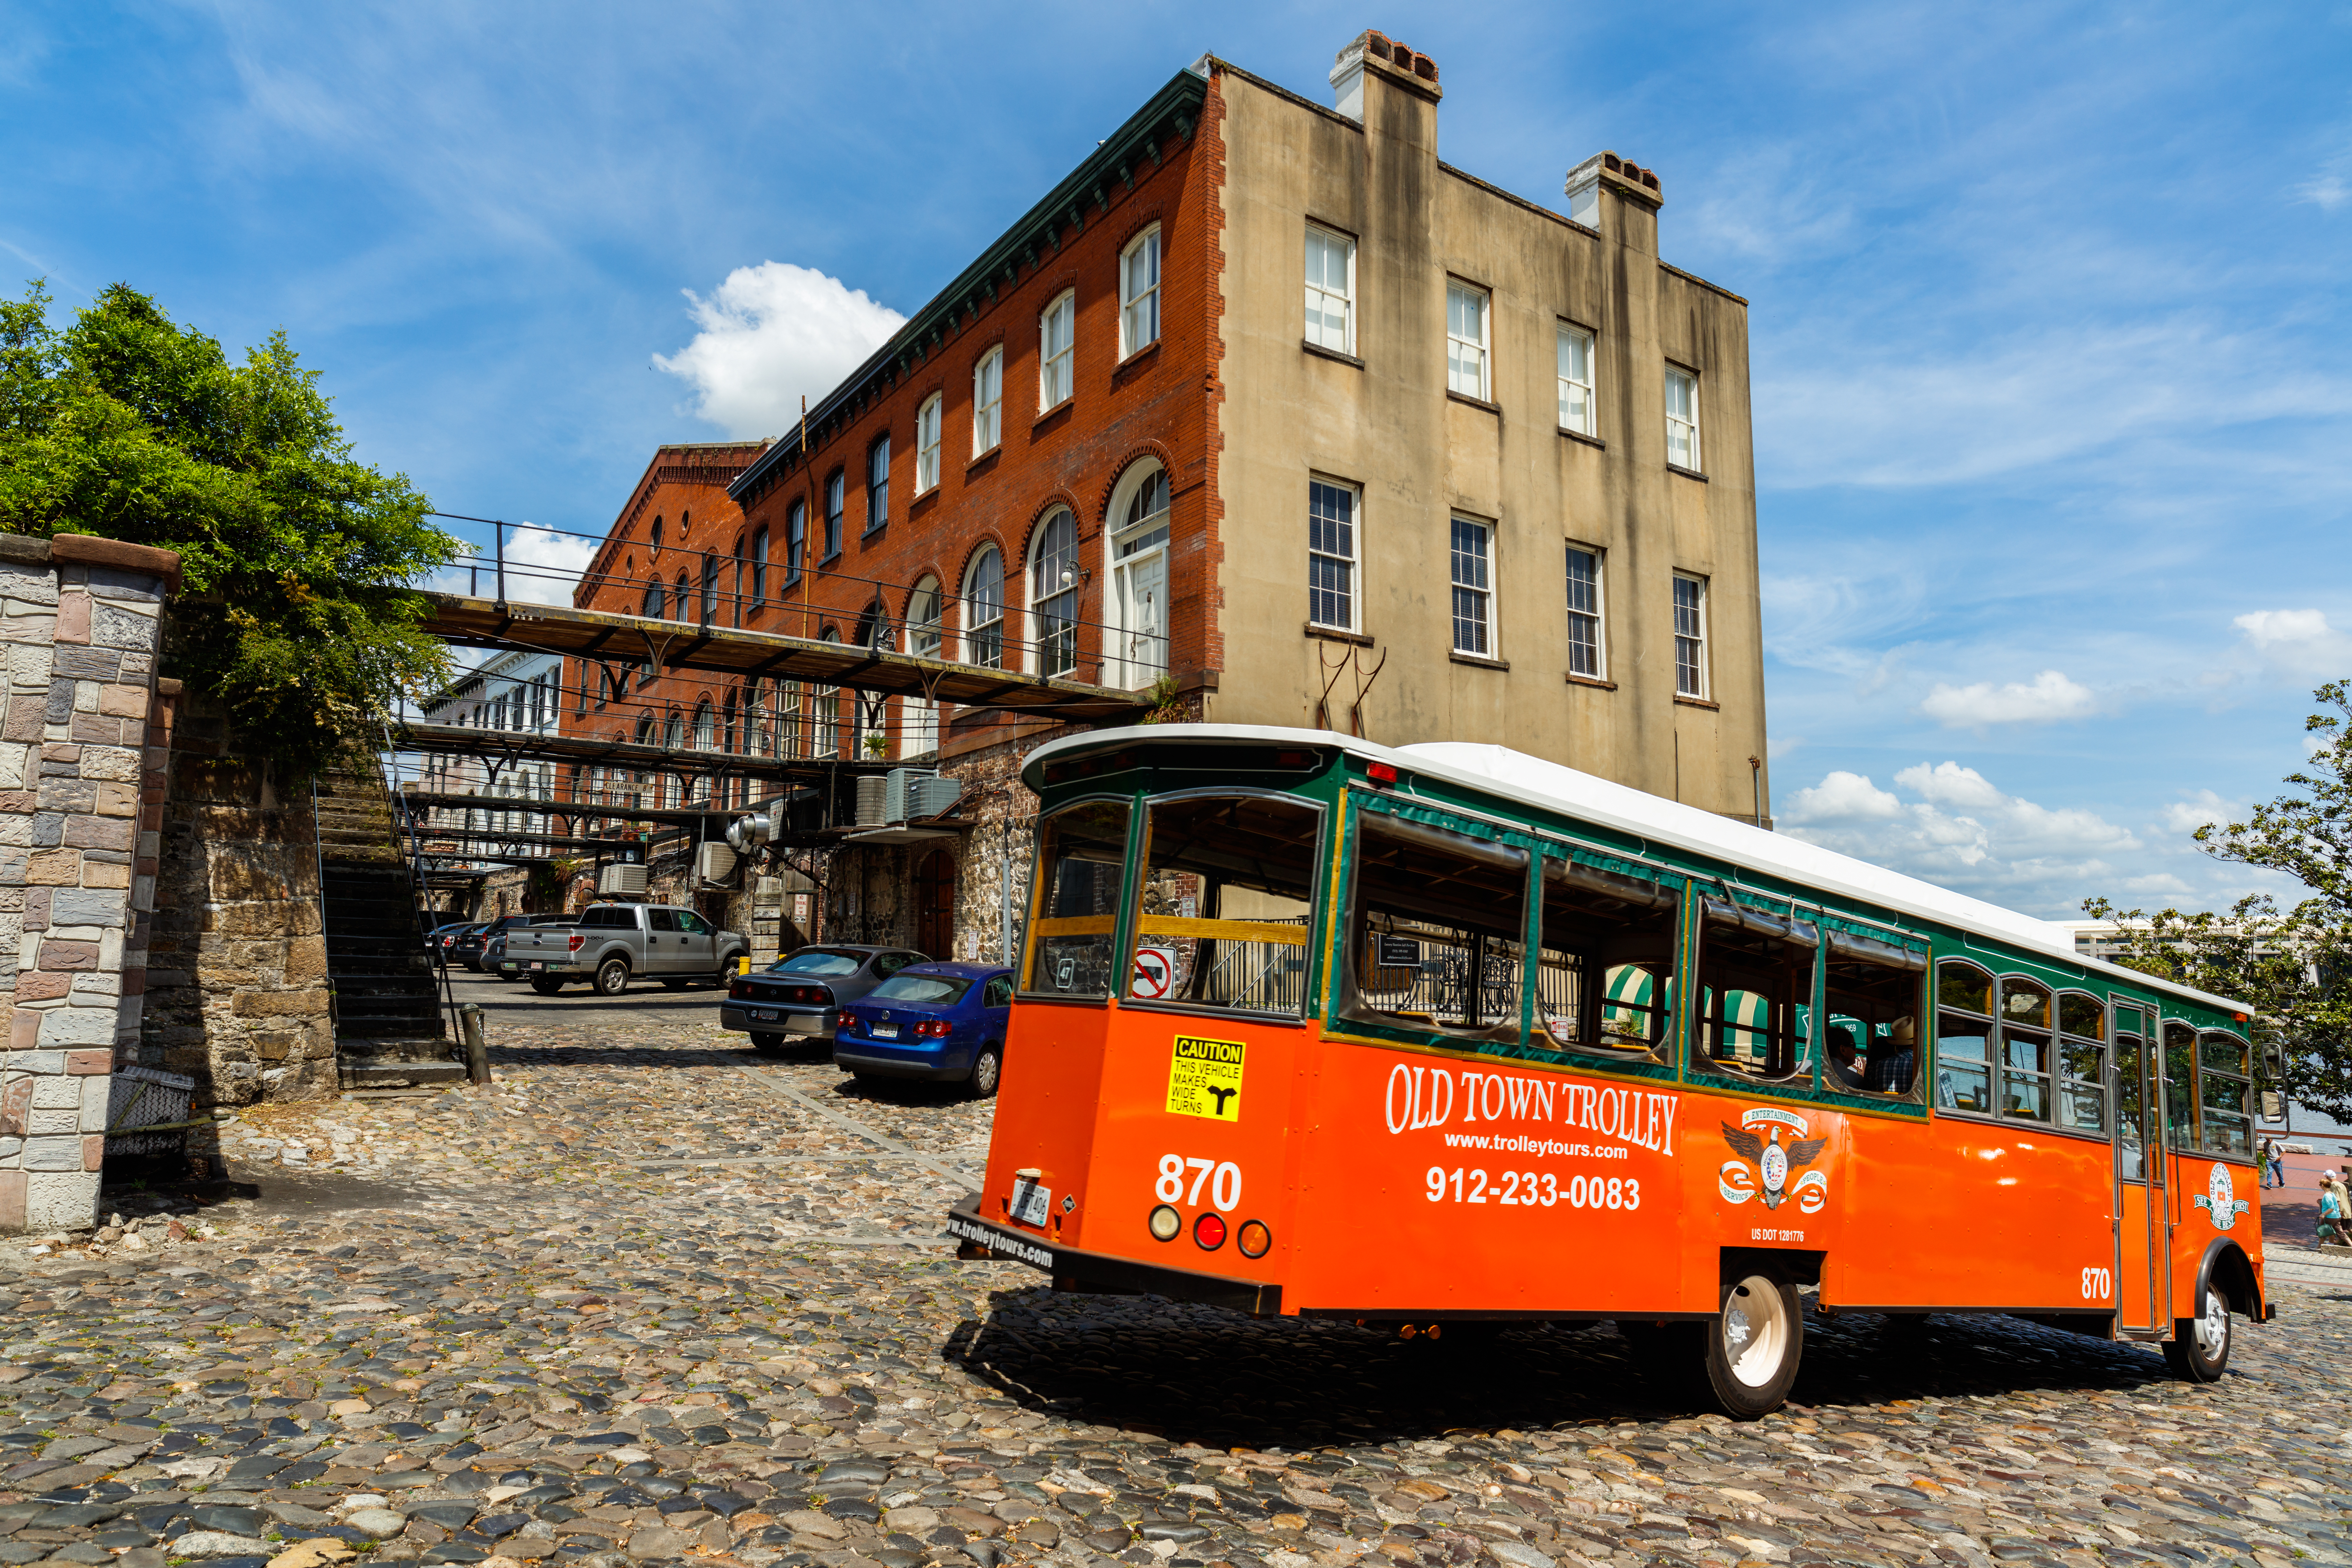 Plan an Amazing Family Vacation with These Best Things to Do in Savannah - Old Savannah Trolley